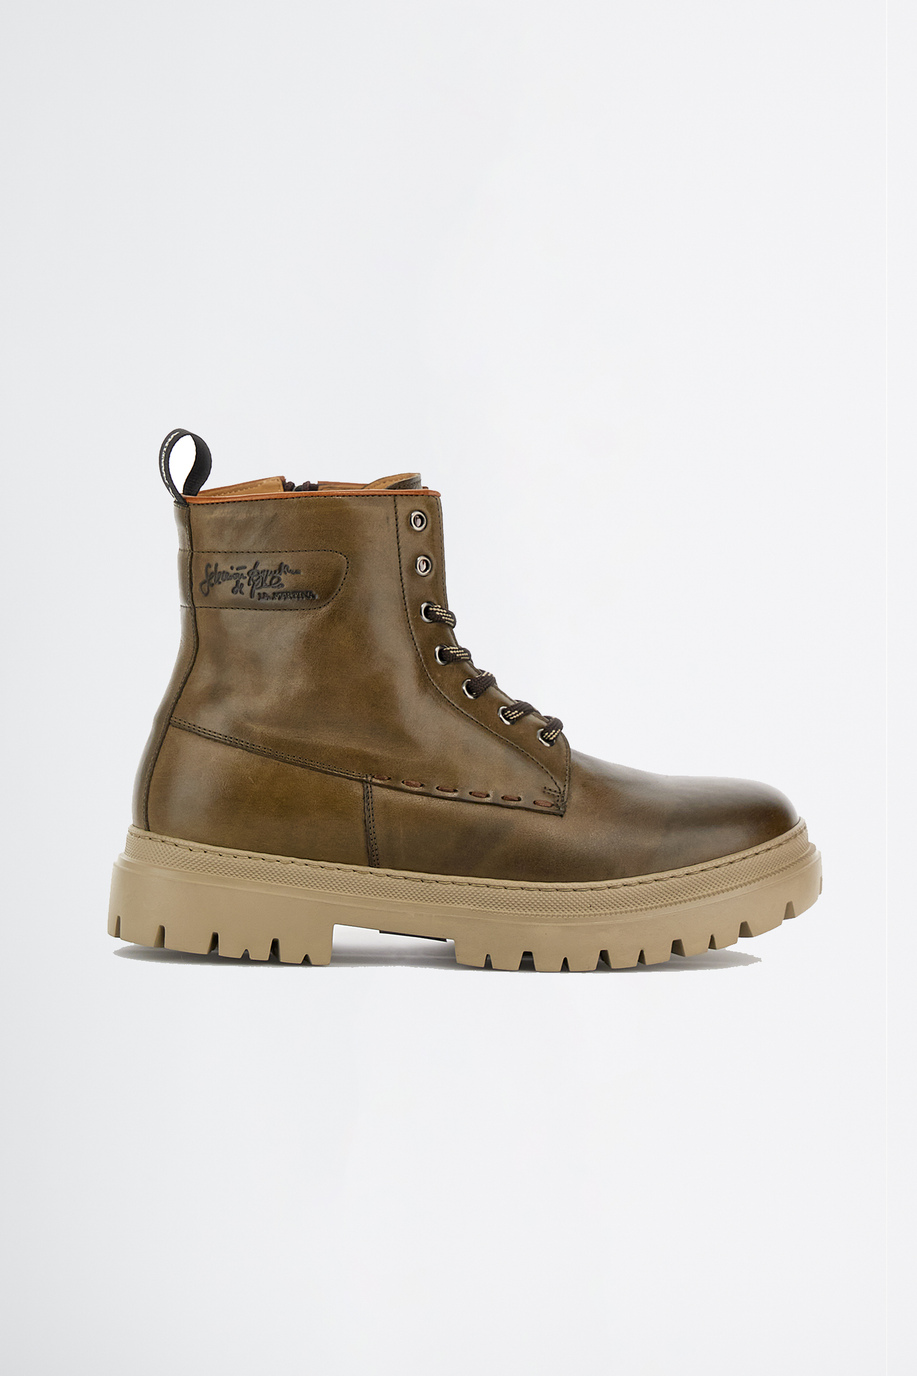 Mountain ankle boot in leather - test 2 | La Martina - Official Online Shop